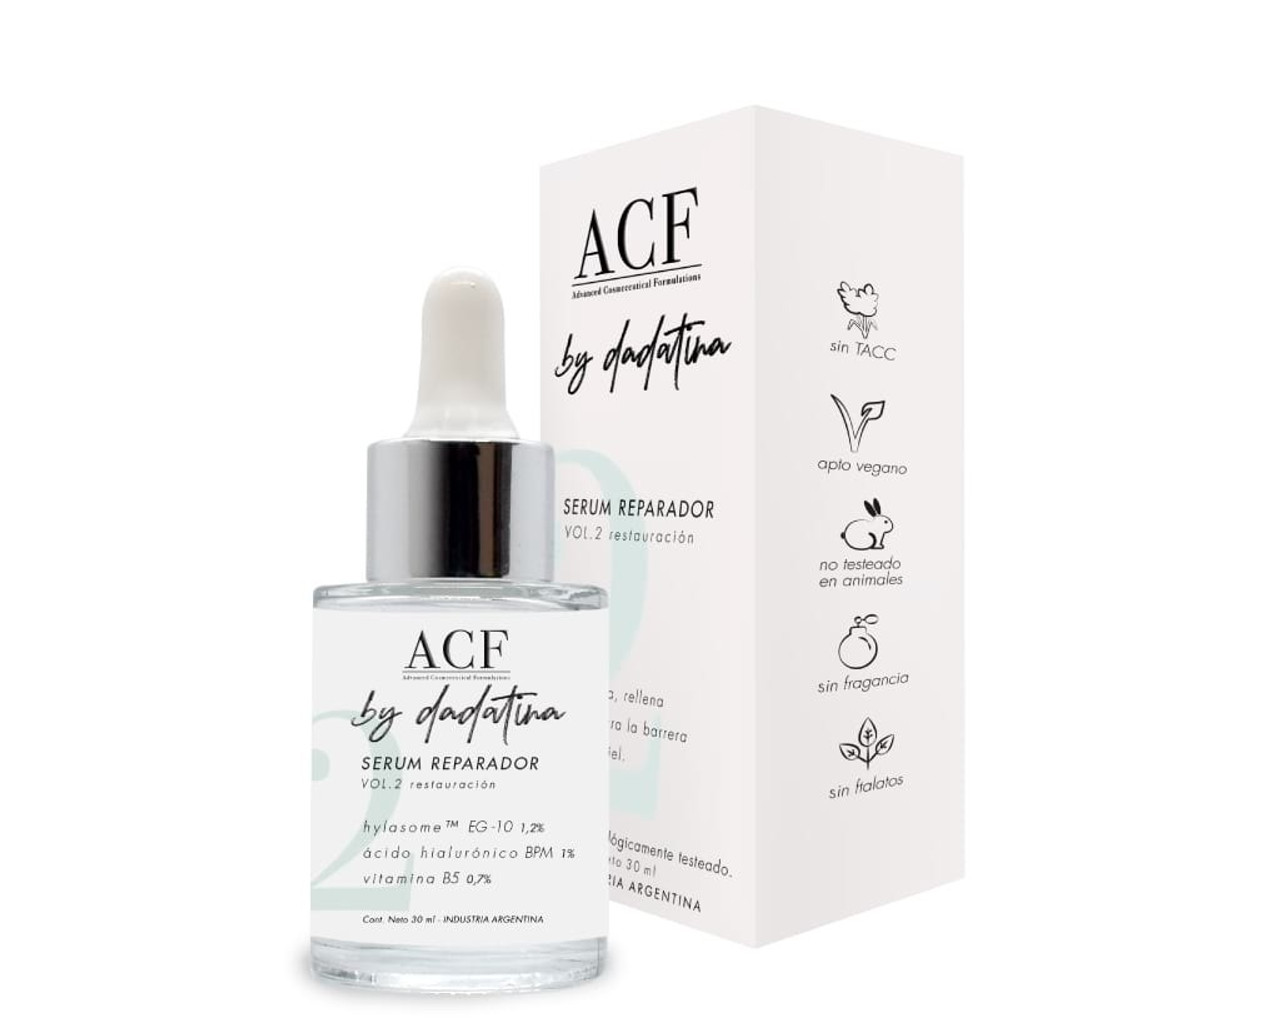 ACF Aceite Limpieza Facial Doble Limpieza Facial Cleanser Oil Makeup  Remover - Vegan & Cruelty Free by Dadatina, 115 ml / 3.88 fl oz - Pampa  Direct